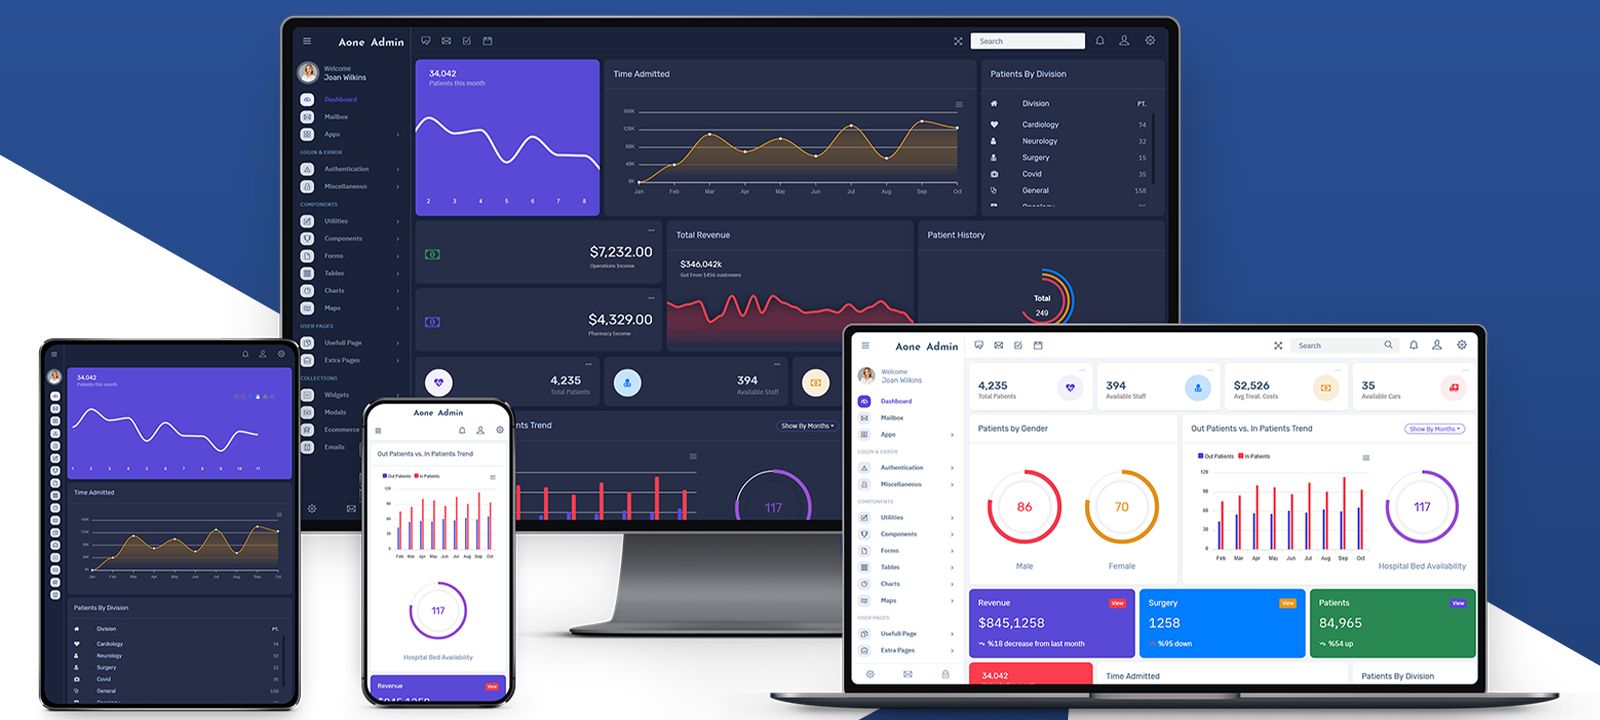 Reasons On Why You Should Use Bootstrap Admin Templates